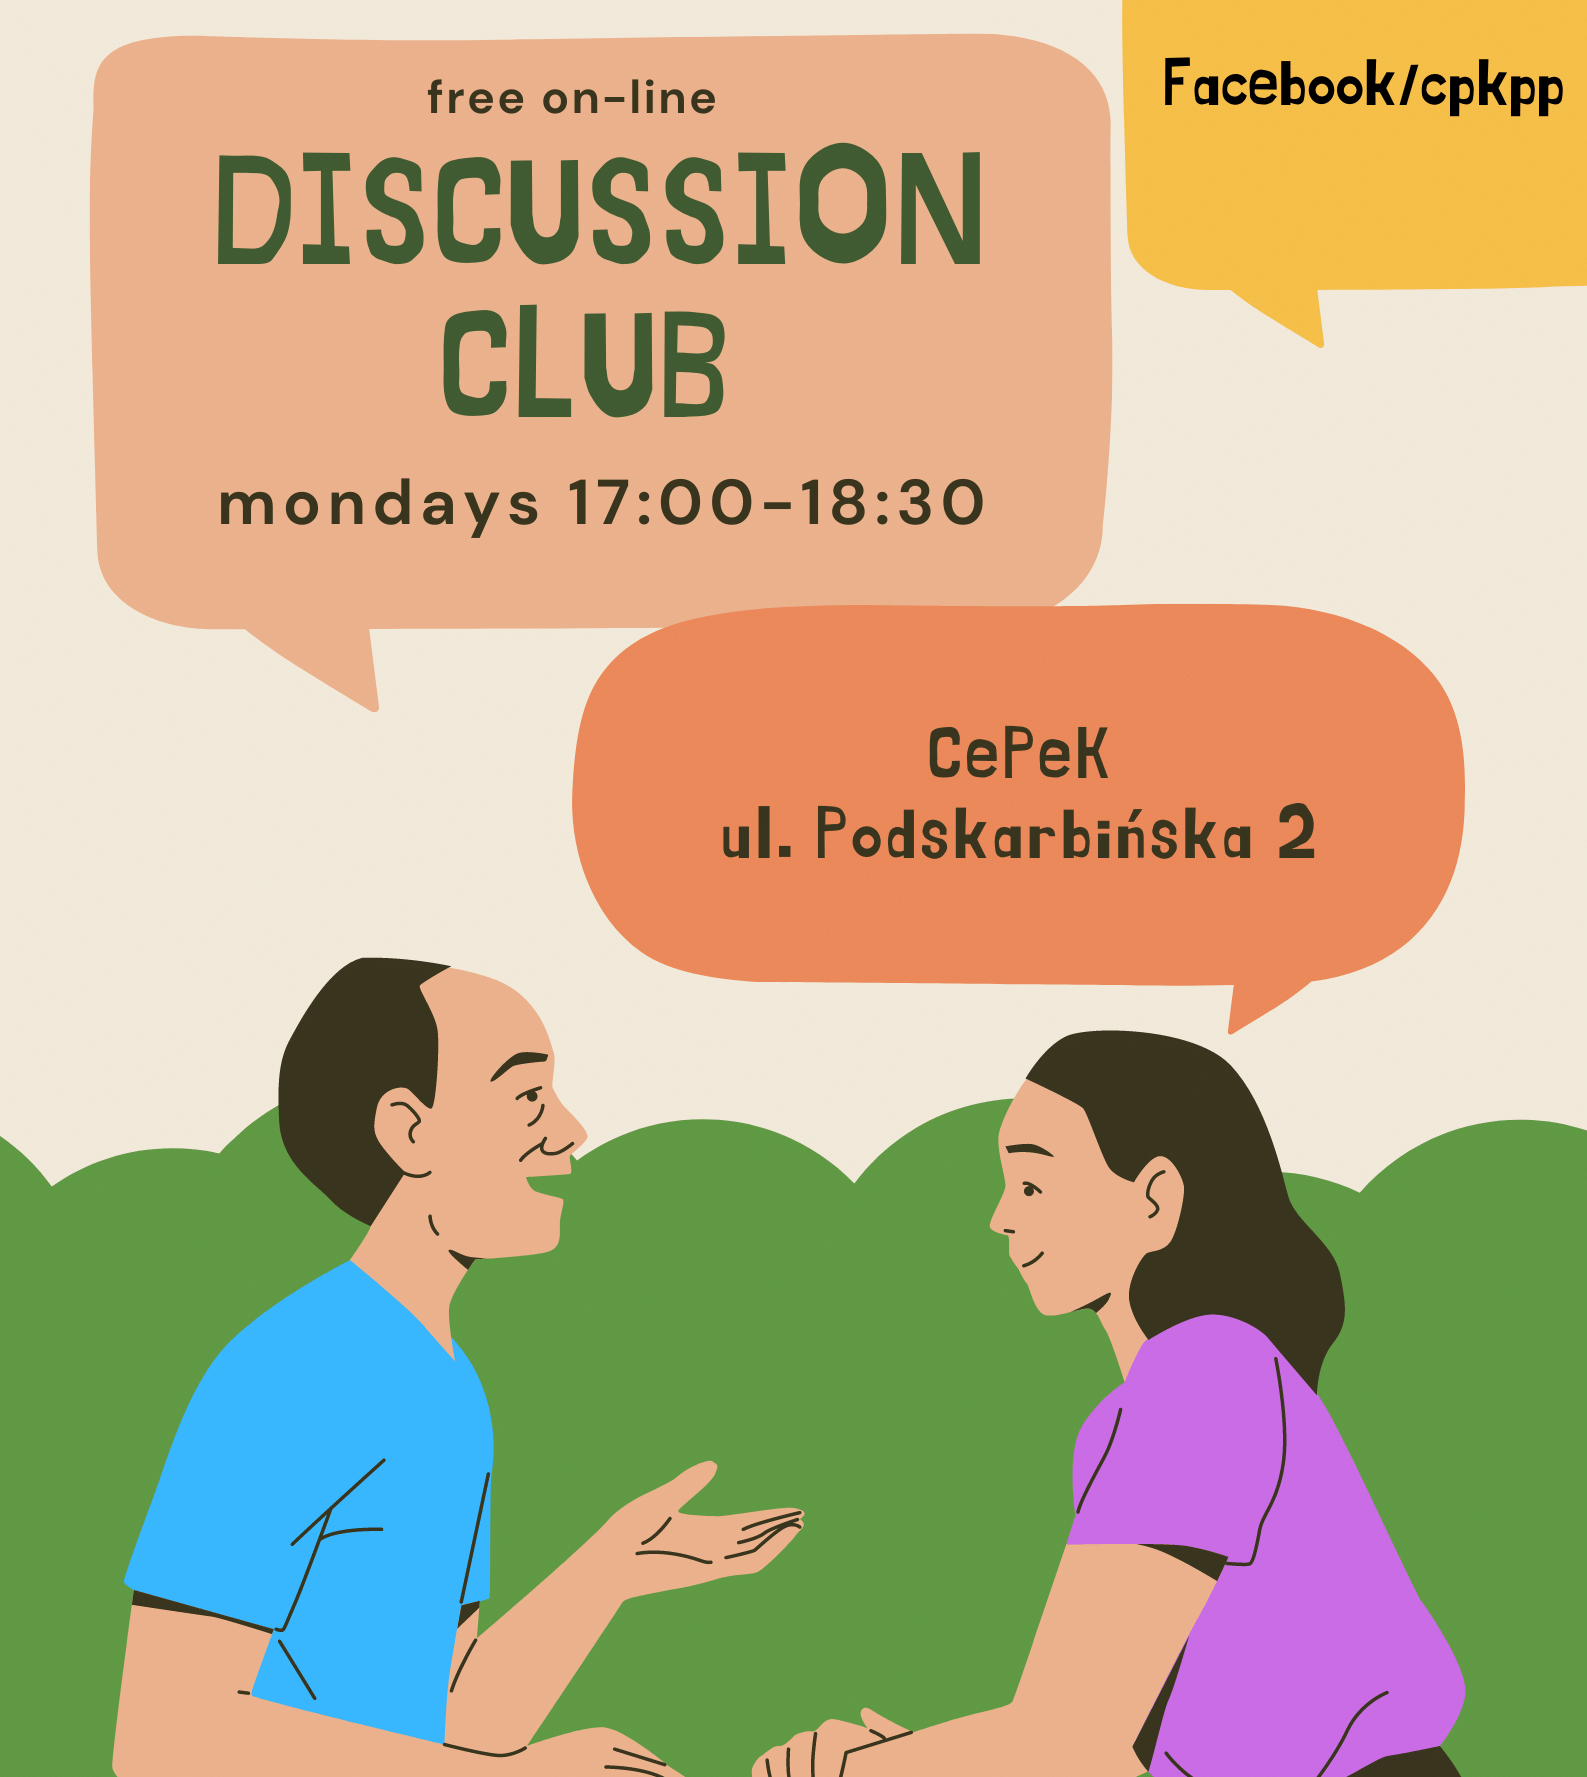 On-line Discussion Club